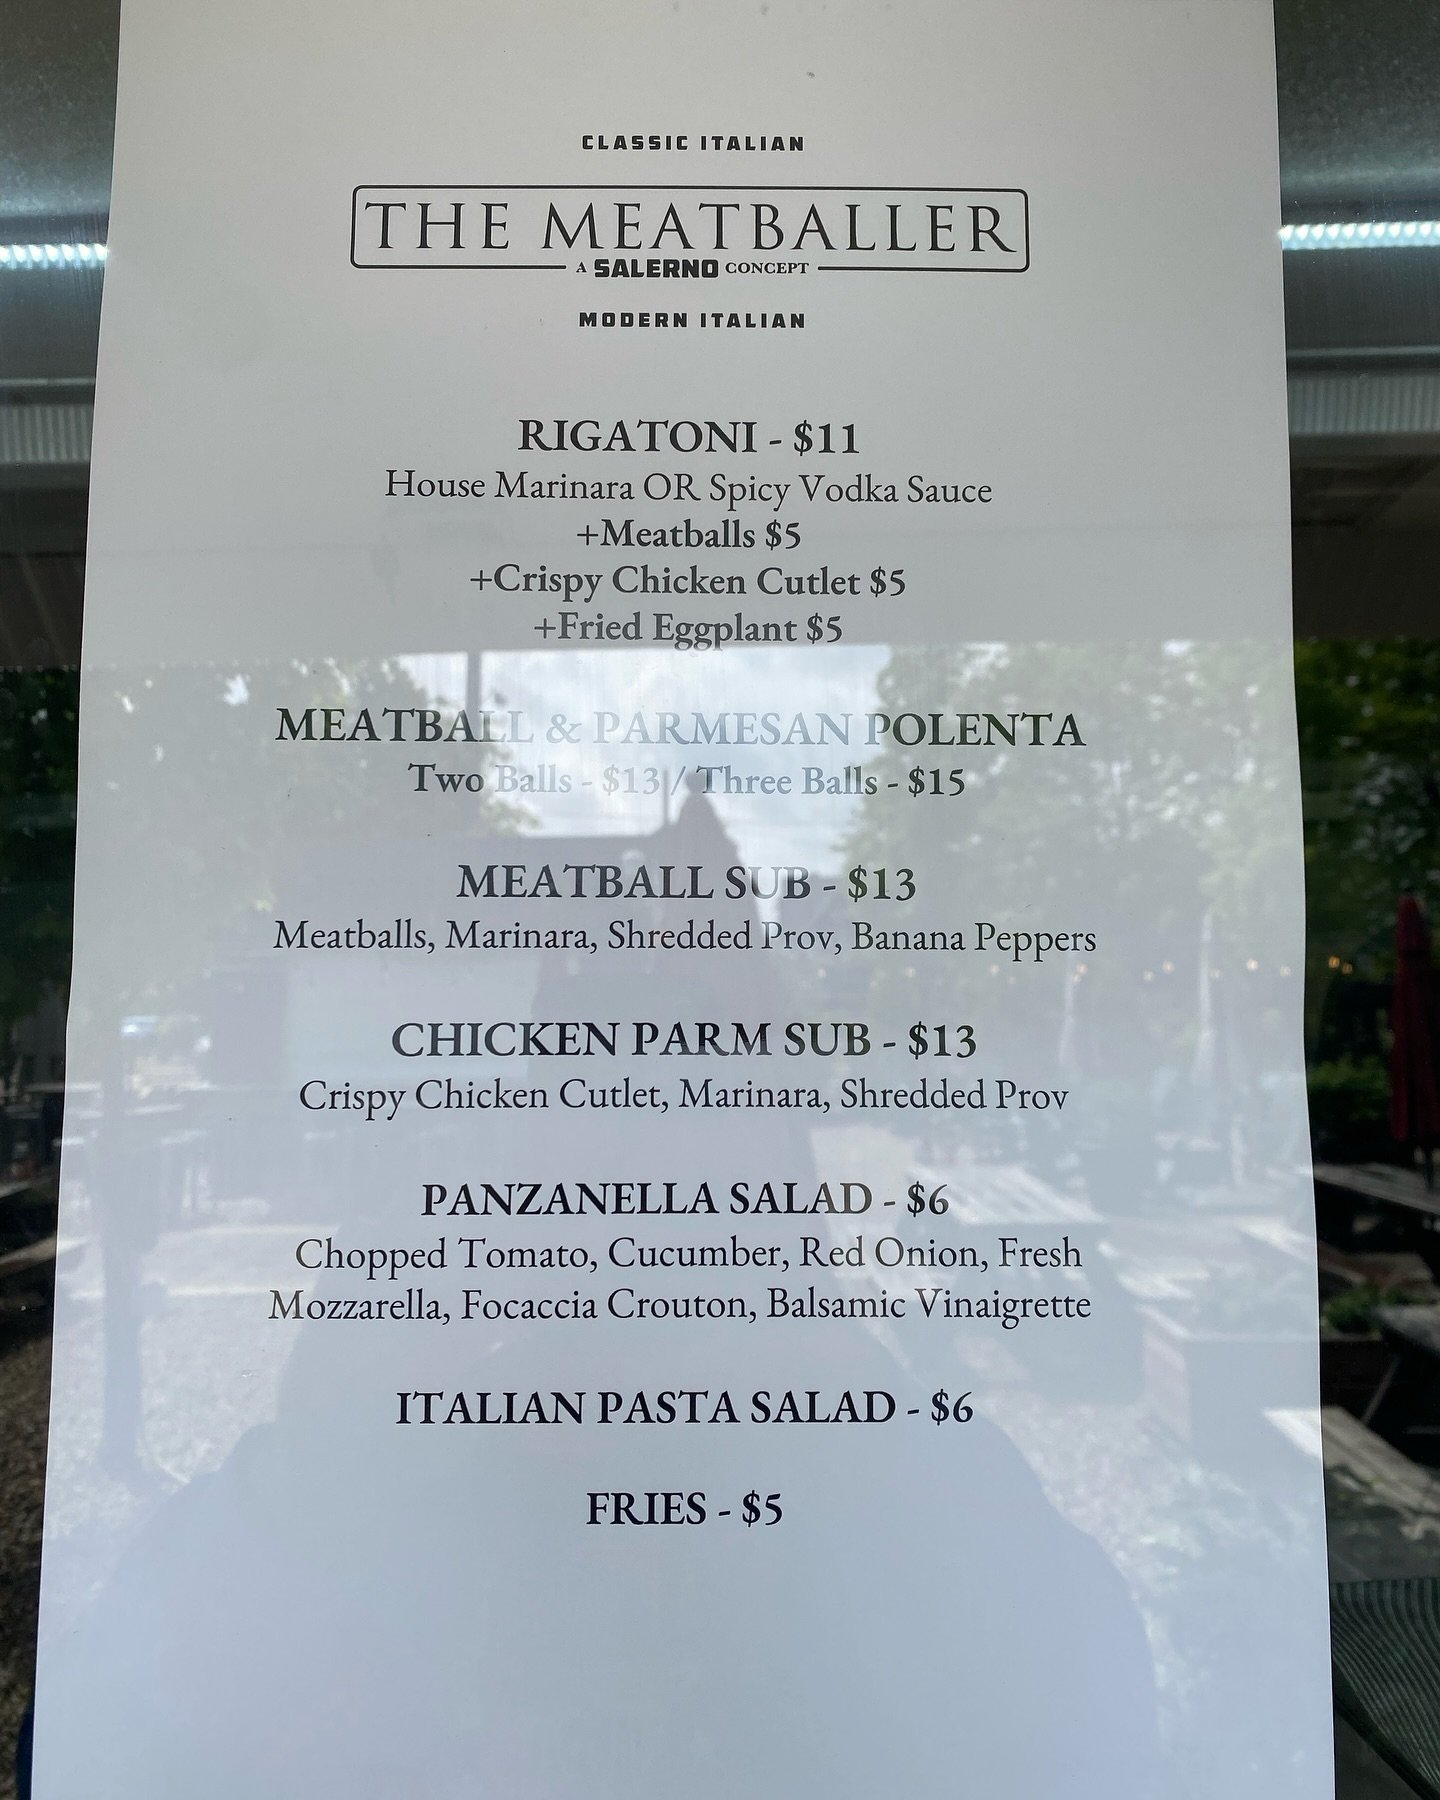 NEW TRUCK
The Meatballer is here 11am-11pm!!
Stop in for some tasty Italian cuisine🍝